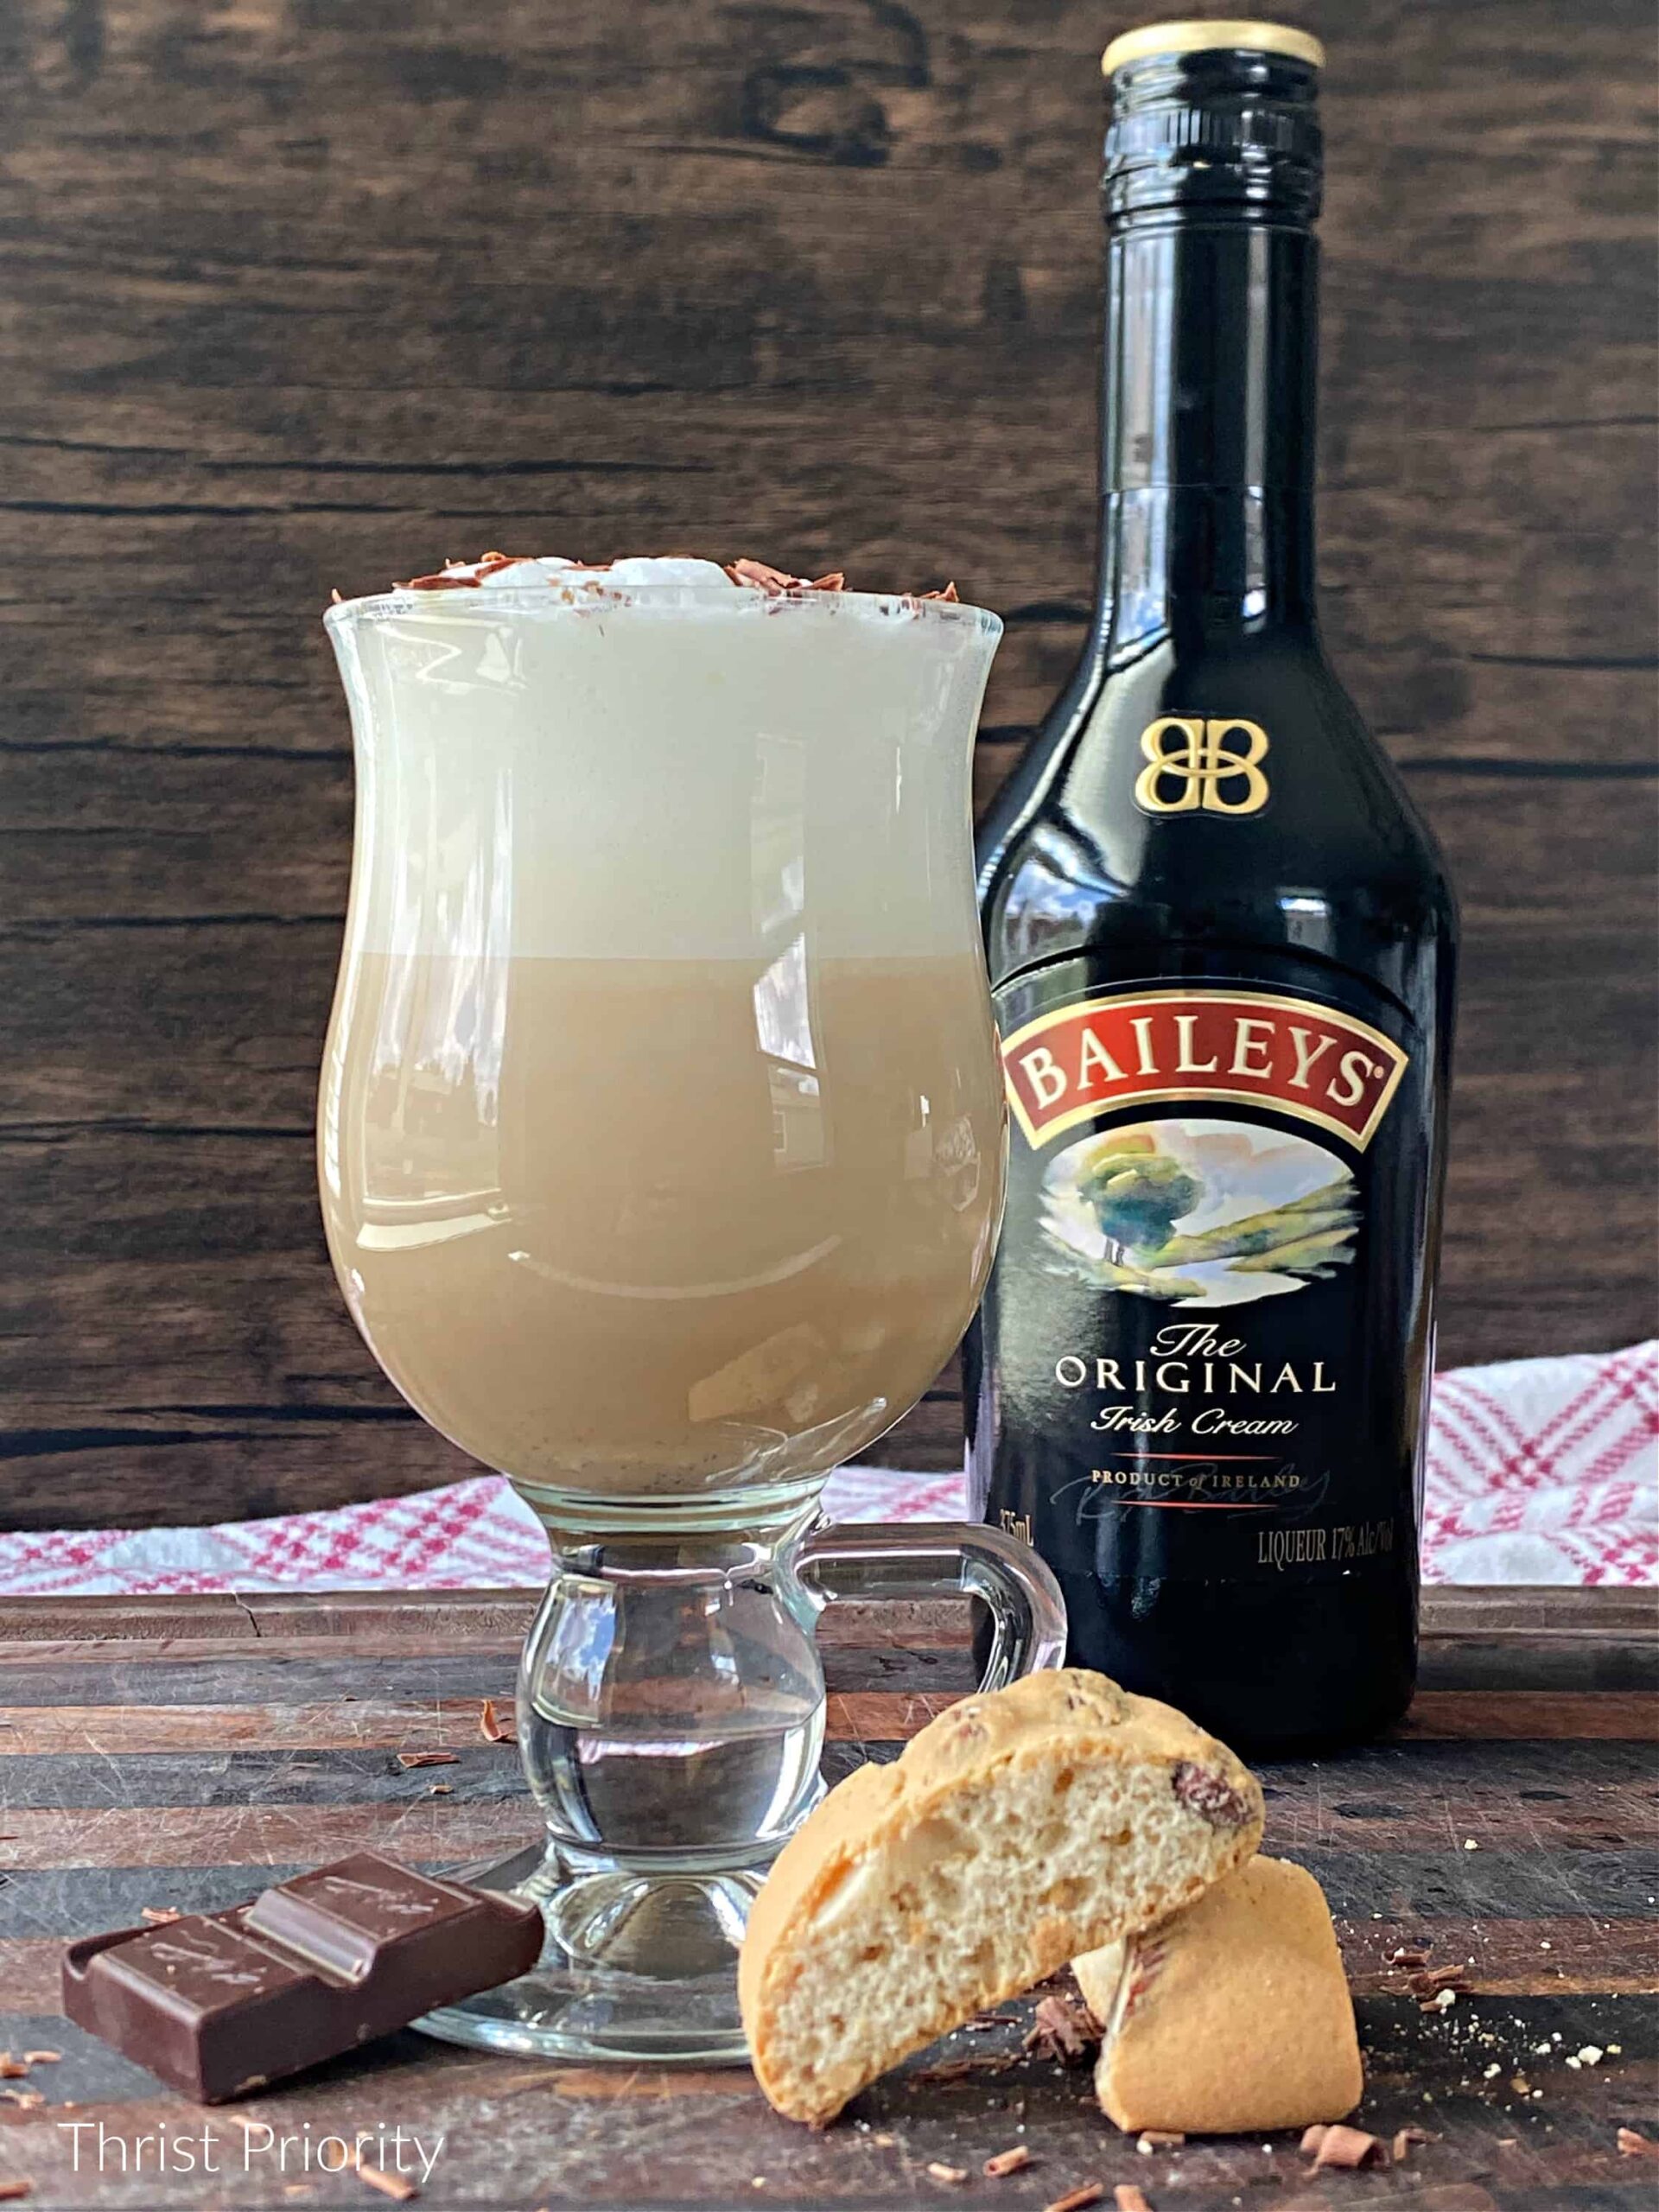 This Baileys silky latte recipe is made with hot milk, Baileys Irish cream, and a shot of espresso. It's the perfect creamy sweet latte.